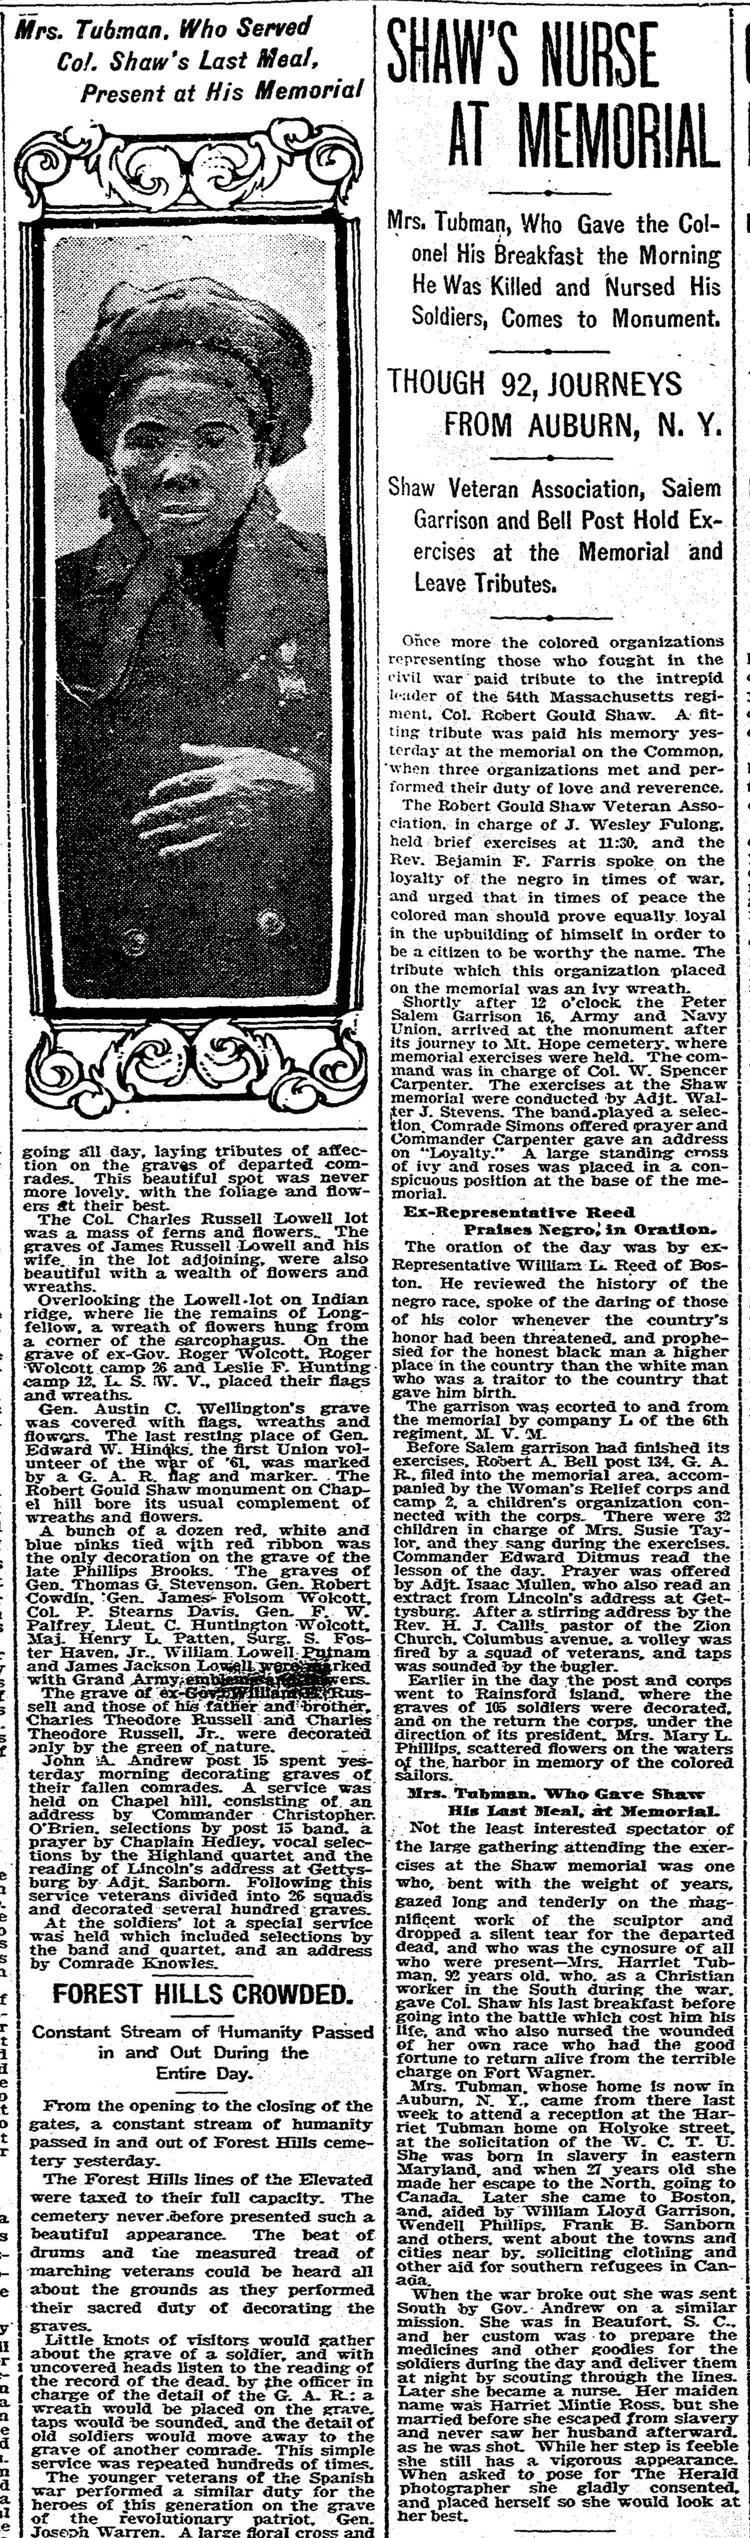 Newspaper article titled Shaw's Nurse at Memorial with a portrait of Harriet Tubman.